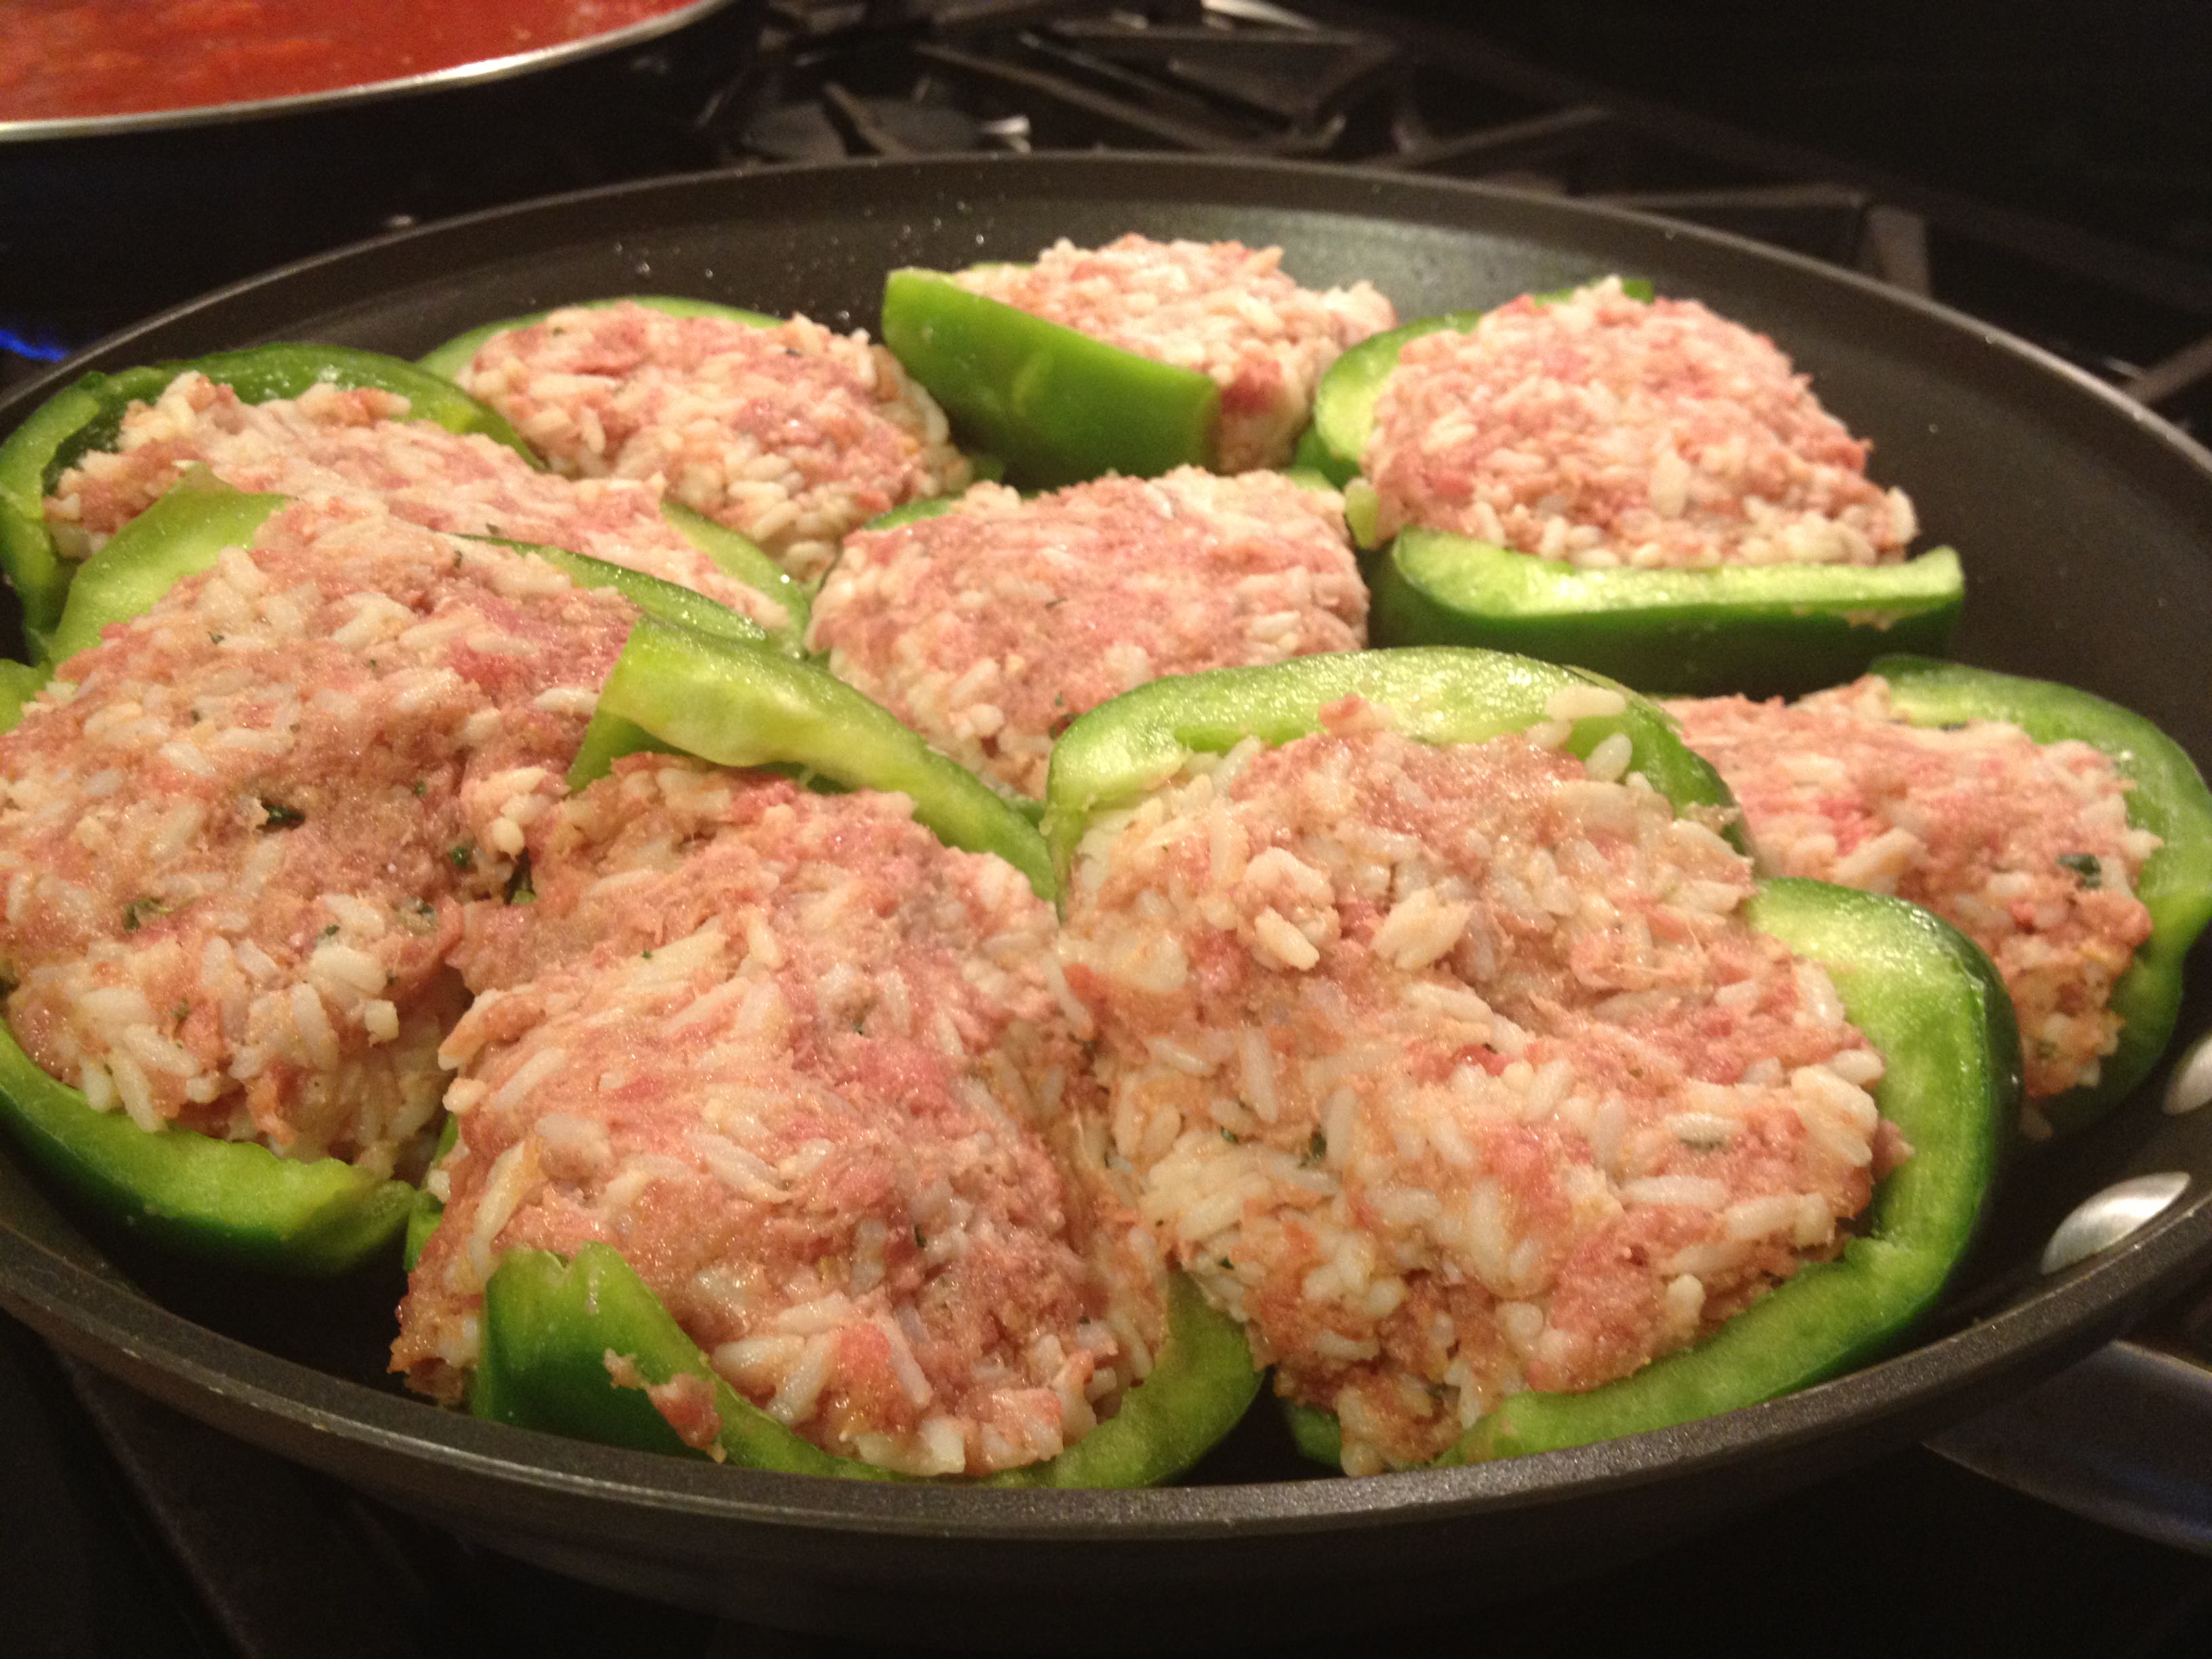 Stuffed Peppers On The Stove